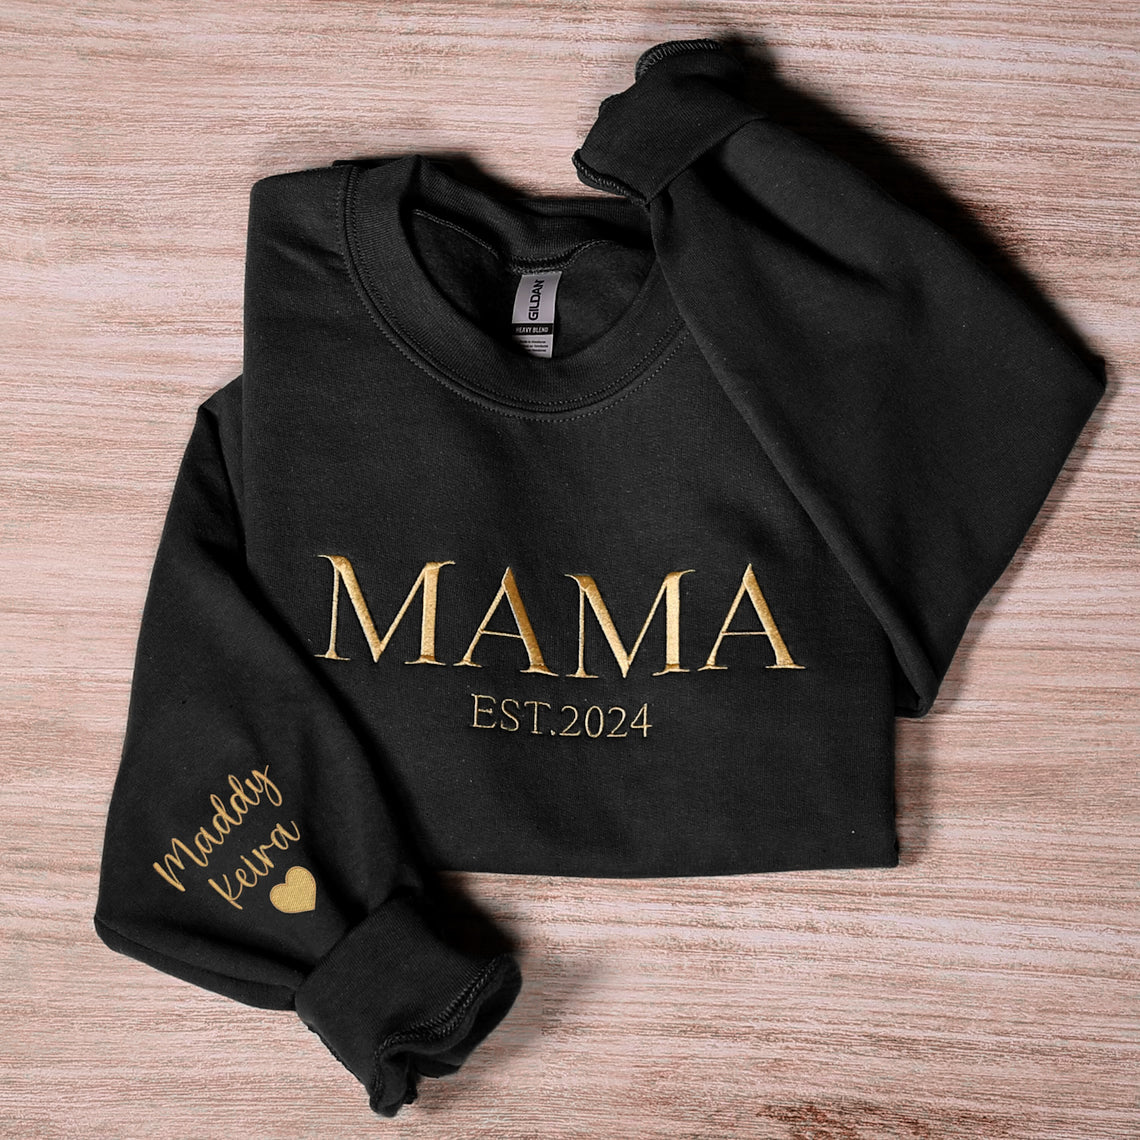 New Mom Outfit Gift For Mother Embroidered Shirt